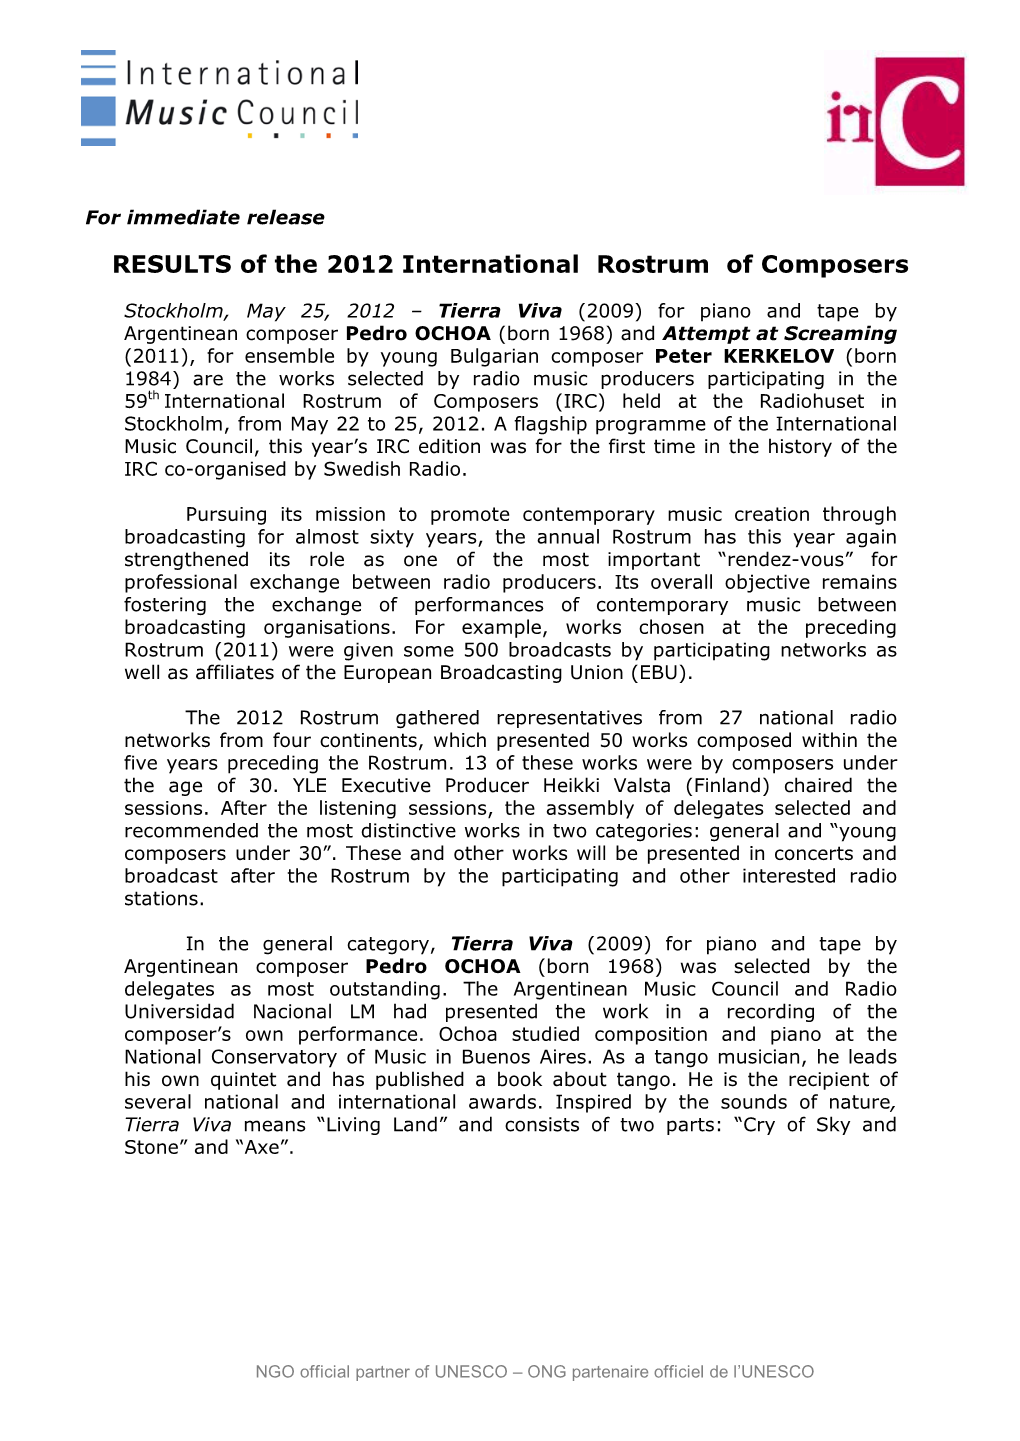 RESULTS of the 2012 International Rostrum of Composers